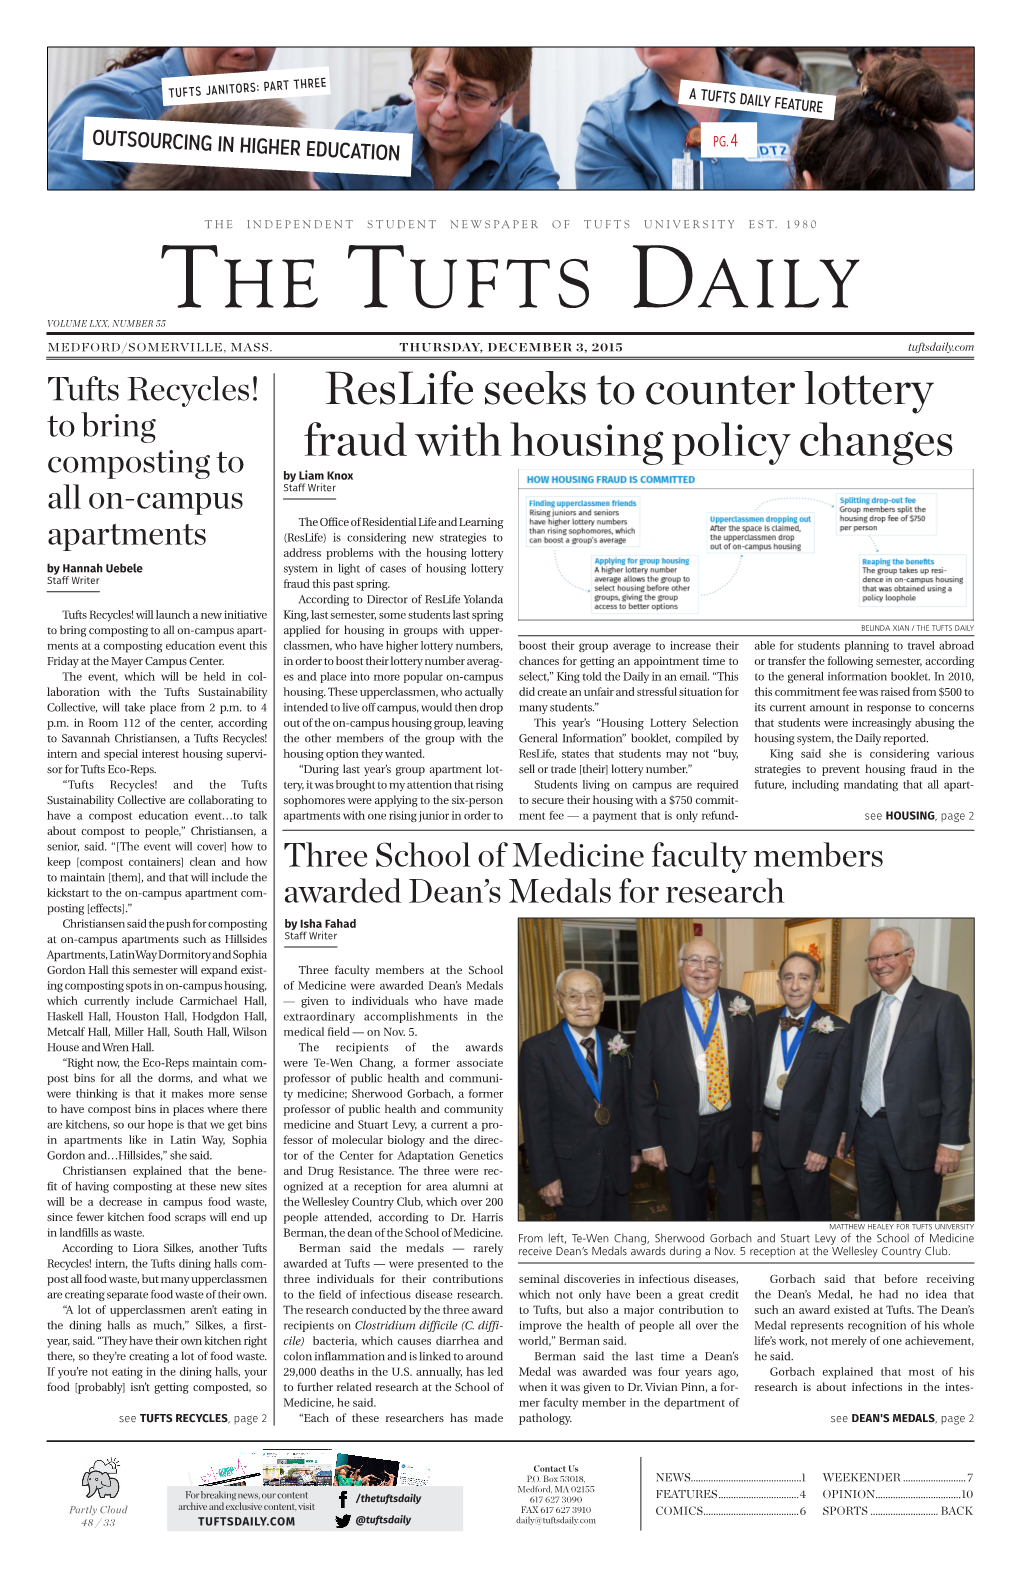 The Tufts Daily Volume Lxx, Number 55